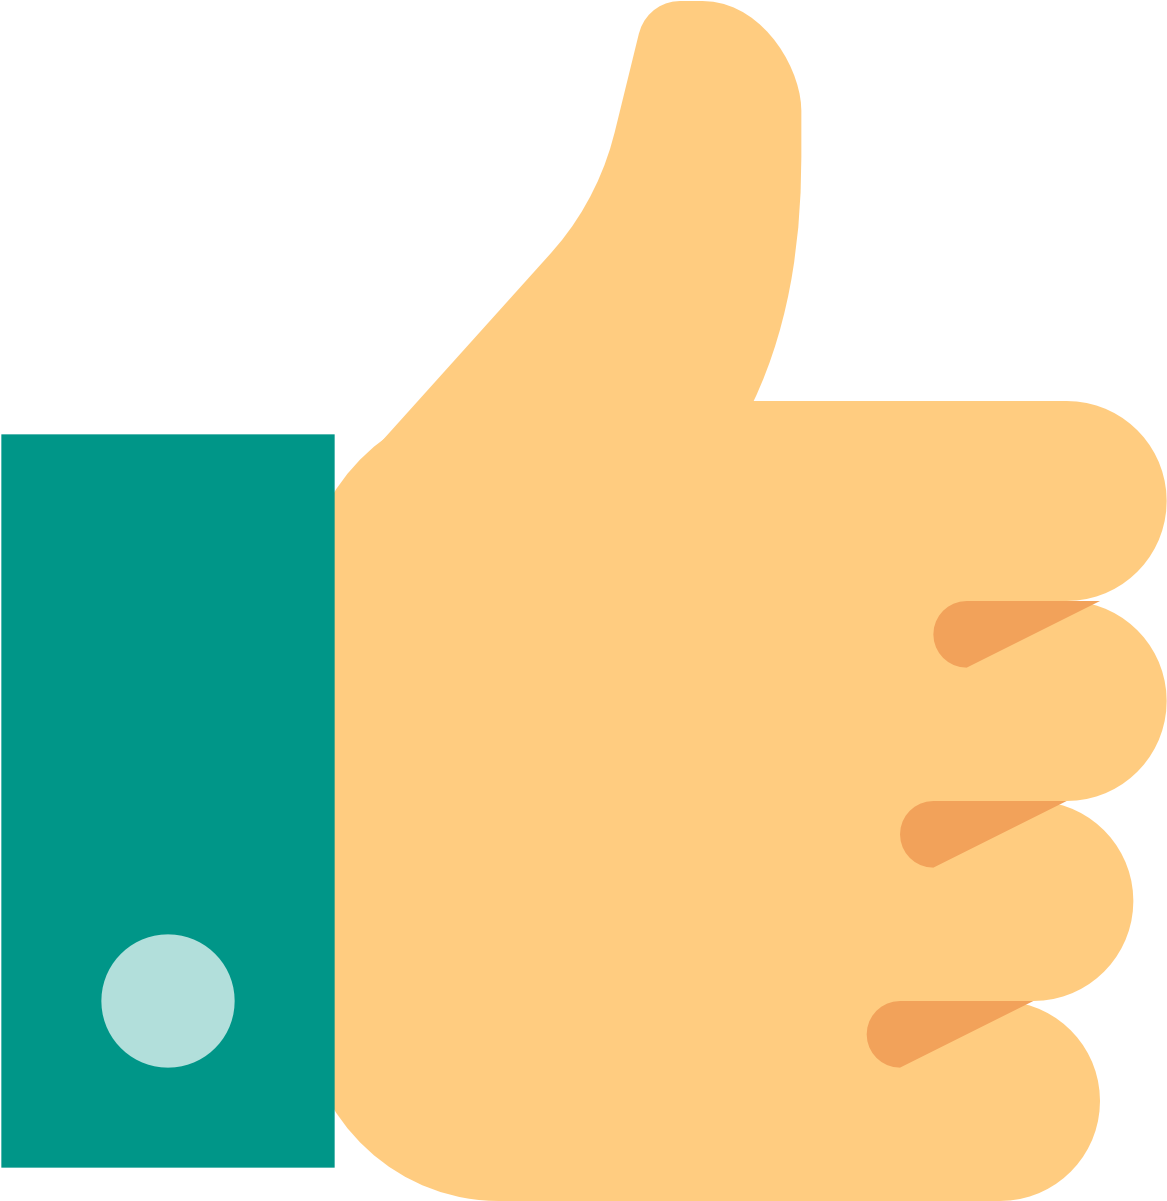 Thumb Up Icon Color - Thumbs Up Like Icon Png (1600x1600)